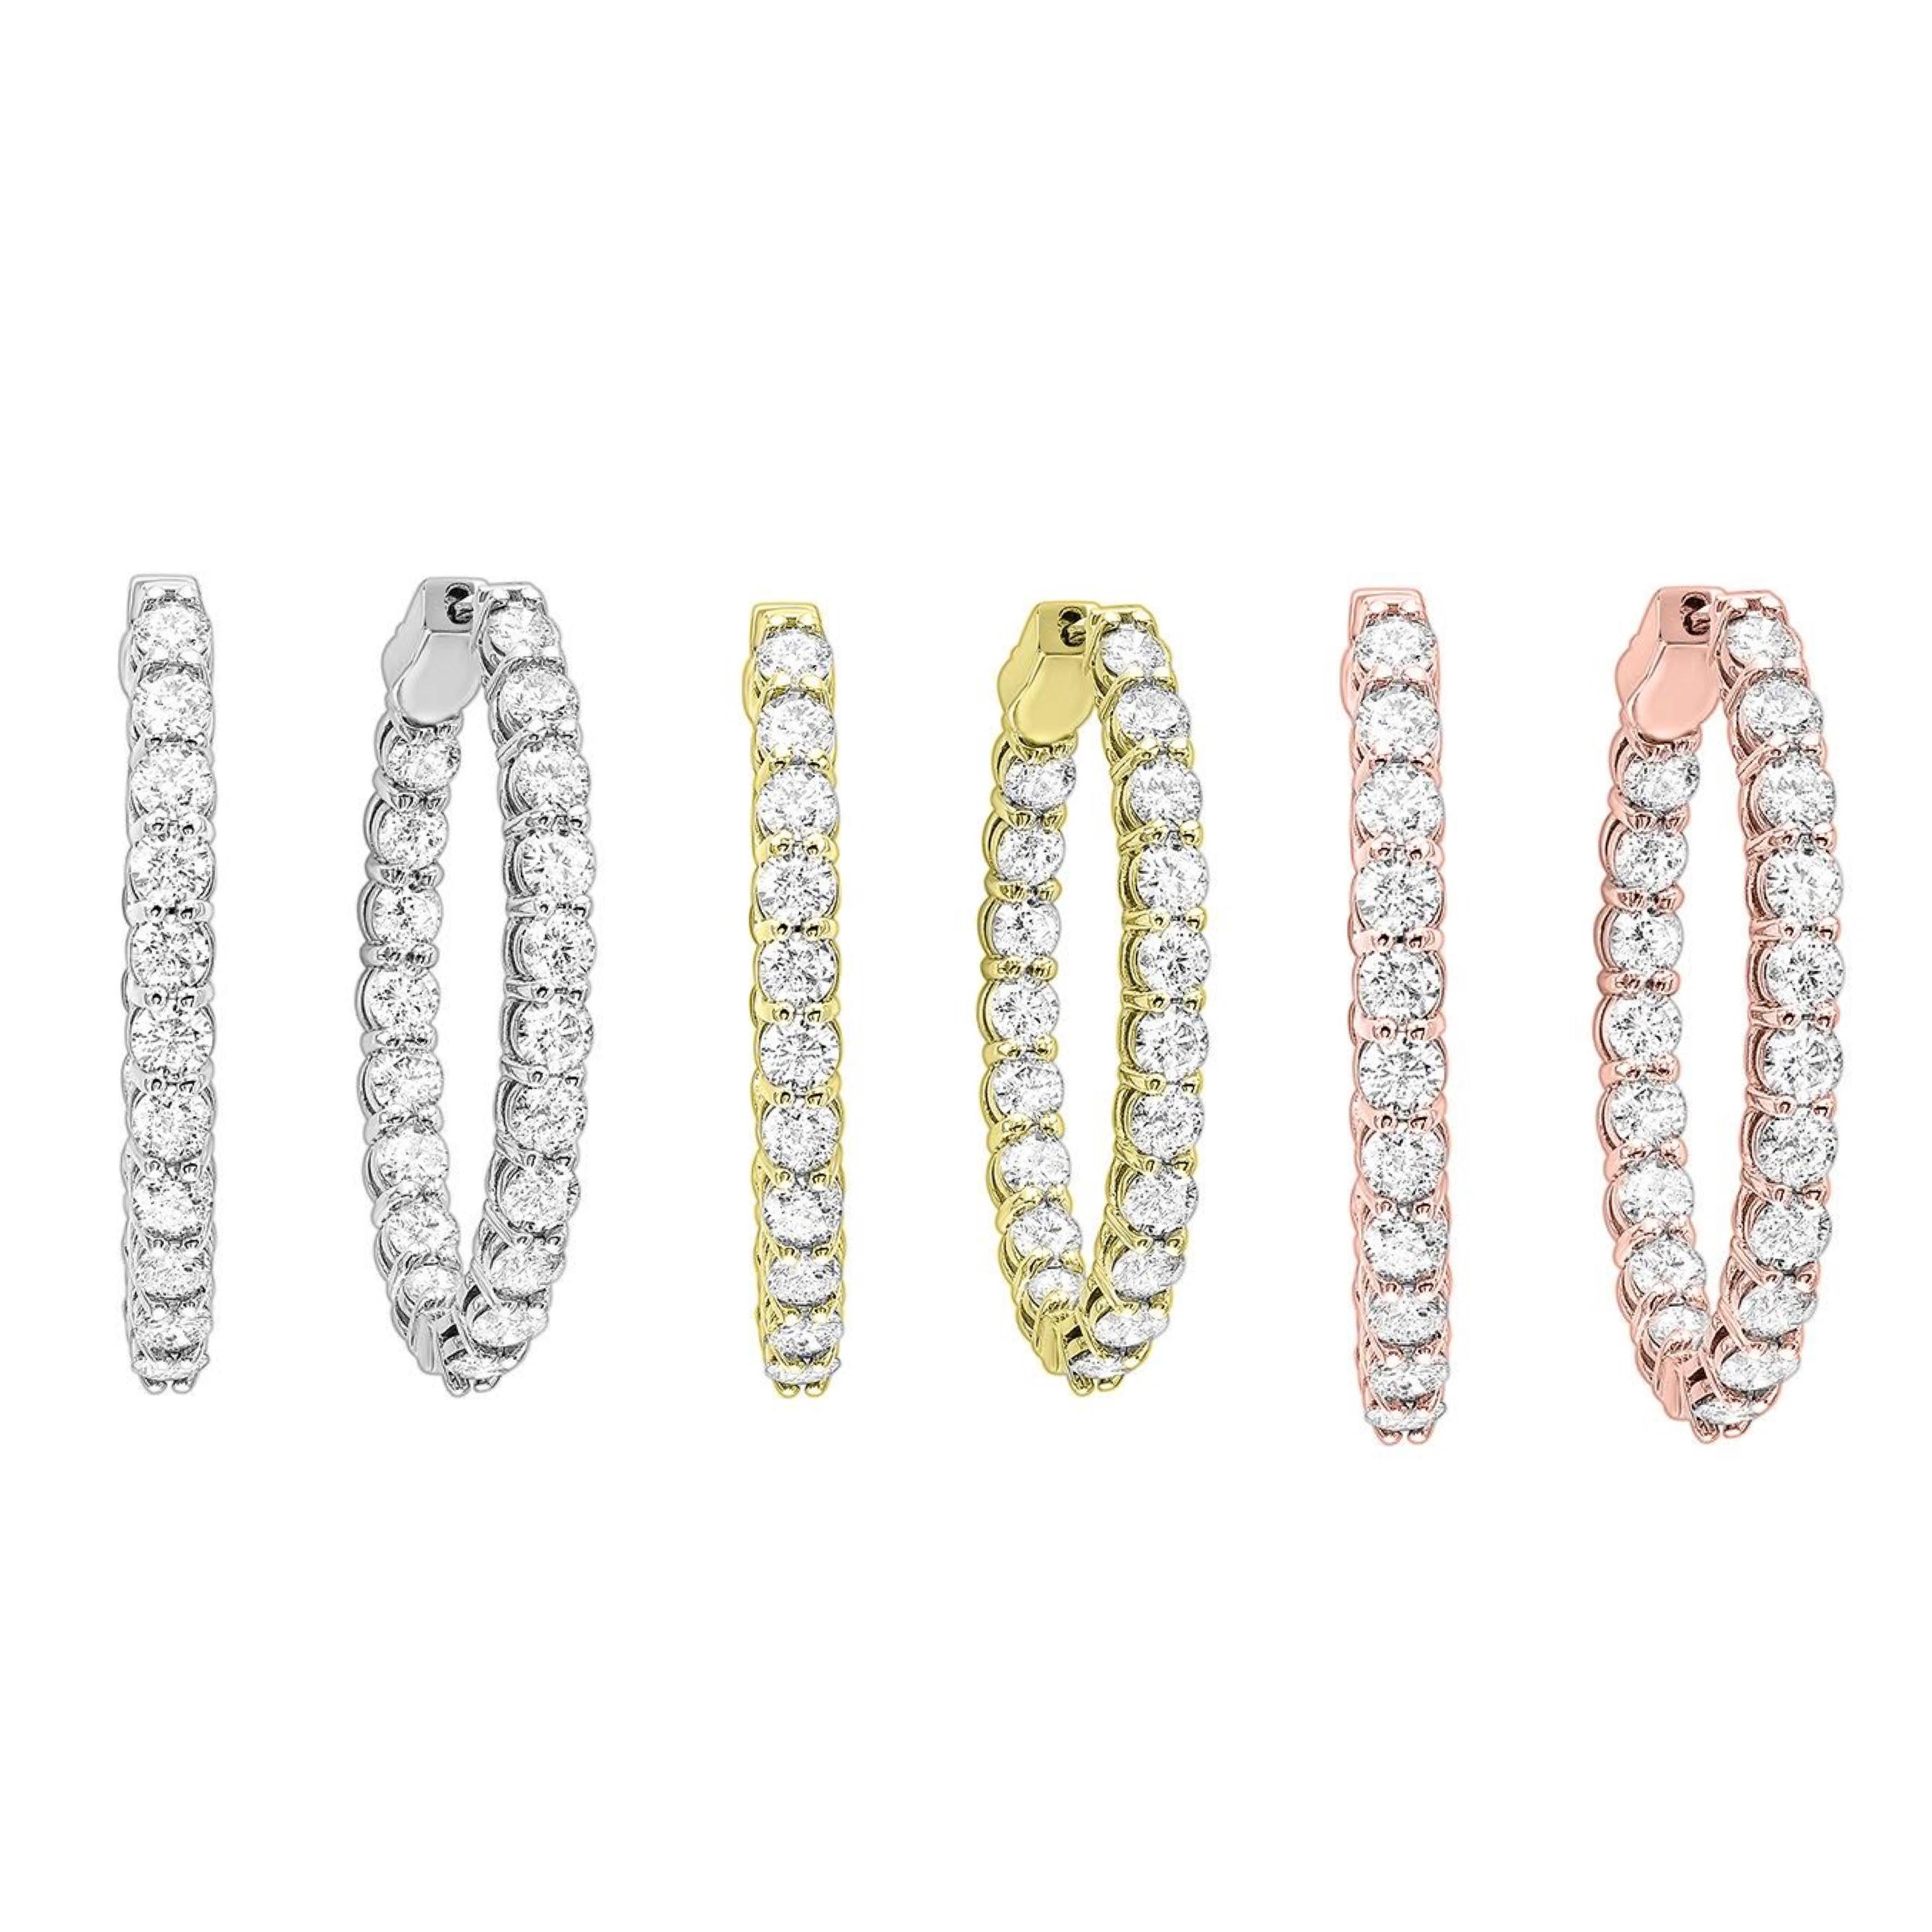 Nothing says luxury like an incredible pair of diamond hoop earrings. These stunning brightly polished 14 karat yellow gold inside out oval-shaped hoop earrings feature a total of 42 round brilliant cut diamonds totaling 3.00 carats are prong set on